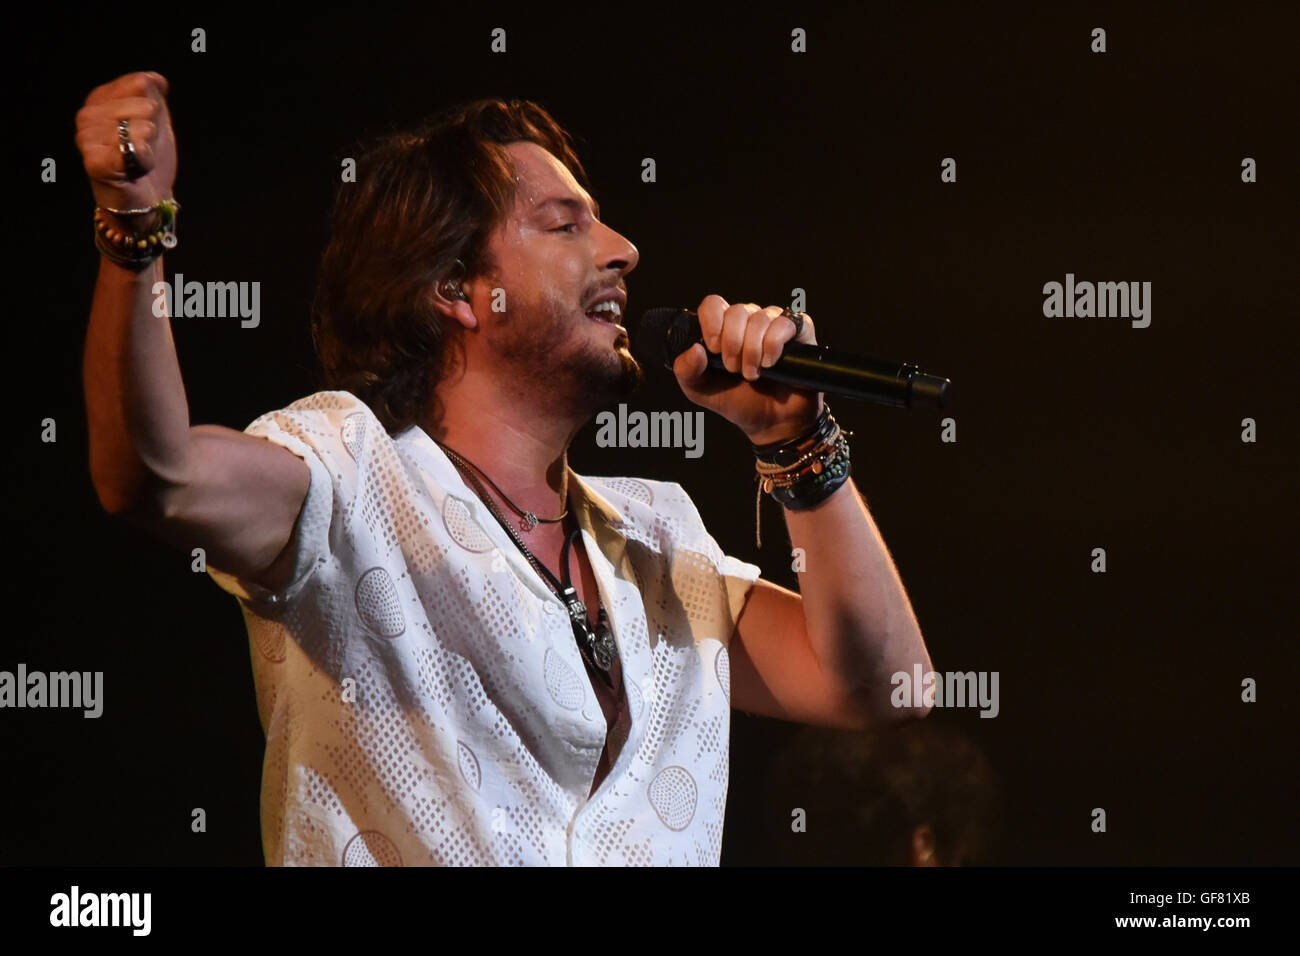 Madrid, Spain. 28th July, 2016. The Spanish singer-songwriter Manuel Carrasco, 35 years-old, pictured during his concert at Teatro Real in Madrid. © Jorge Sanz/Pacific Press/Alamy Live News Stock Photo